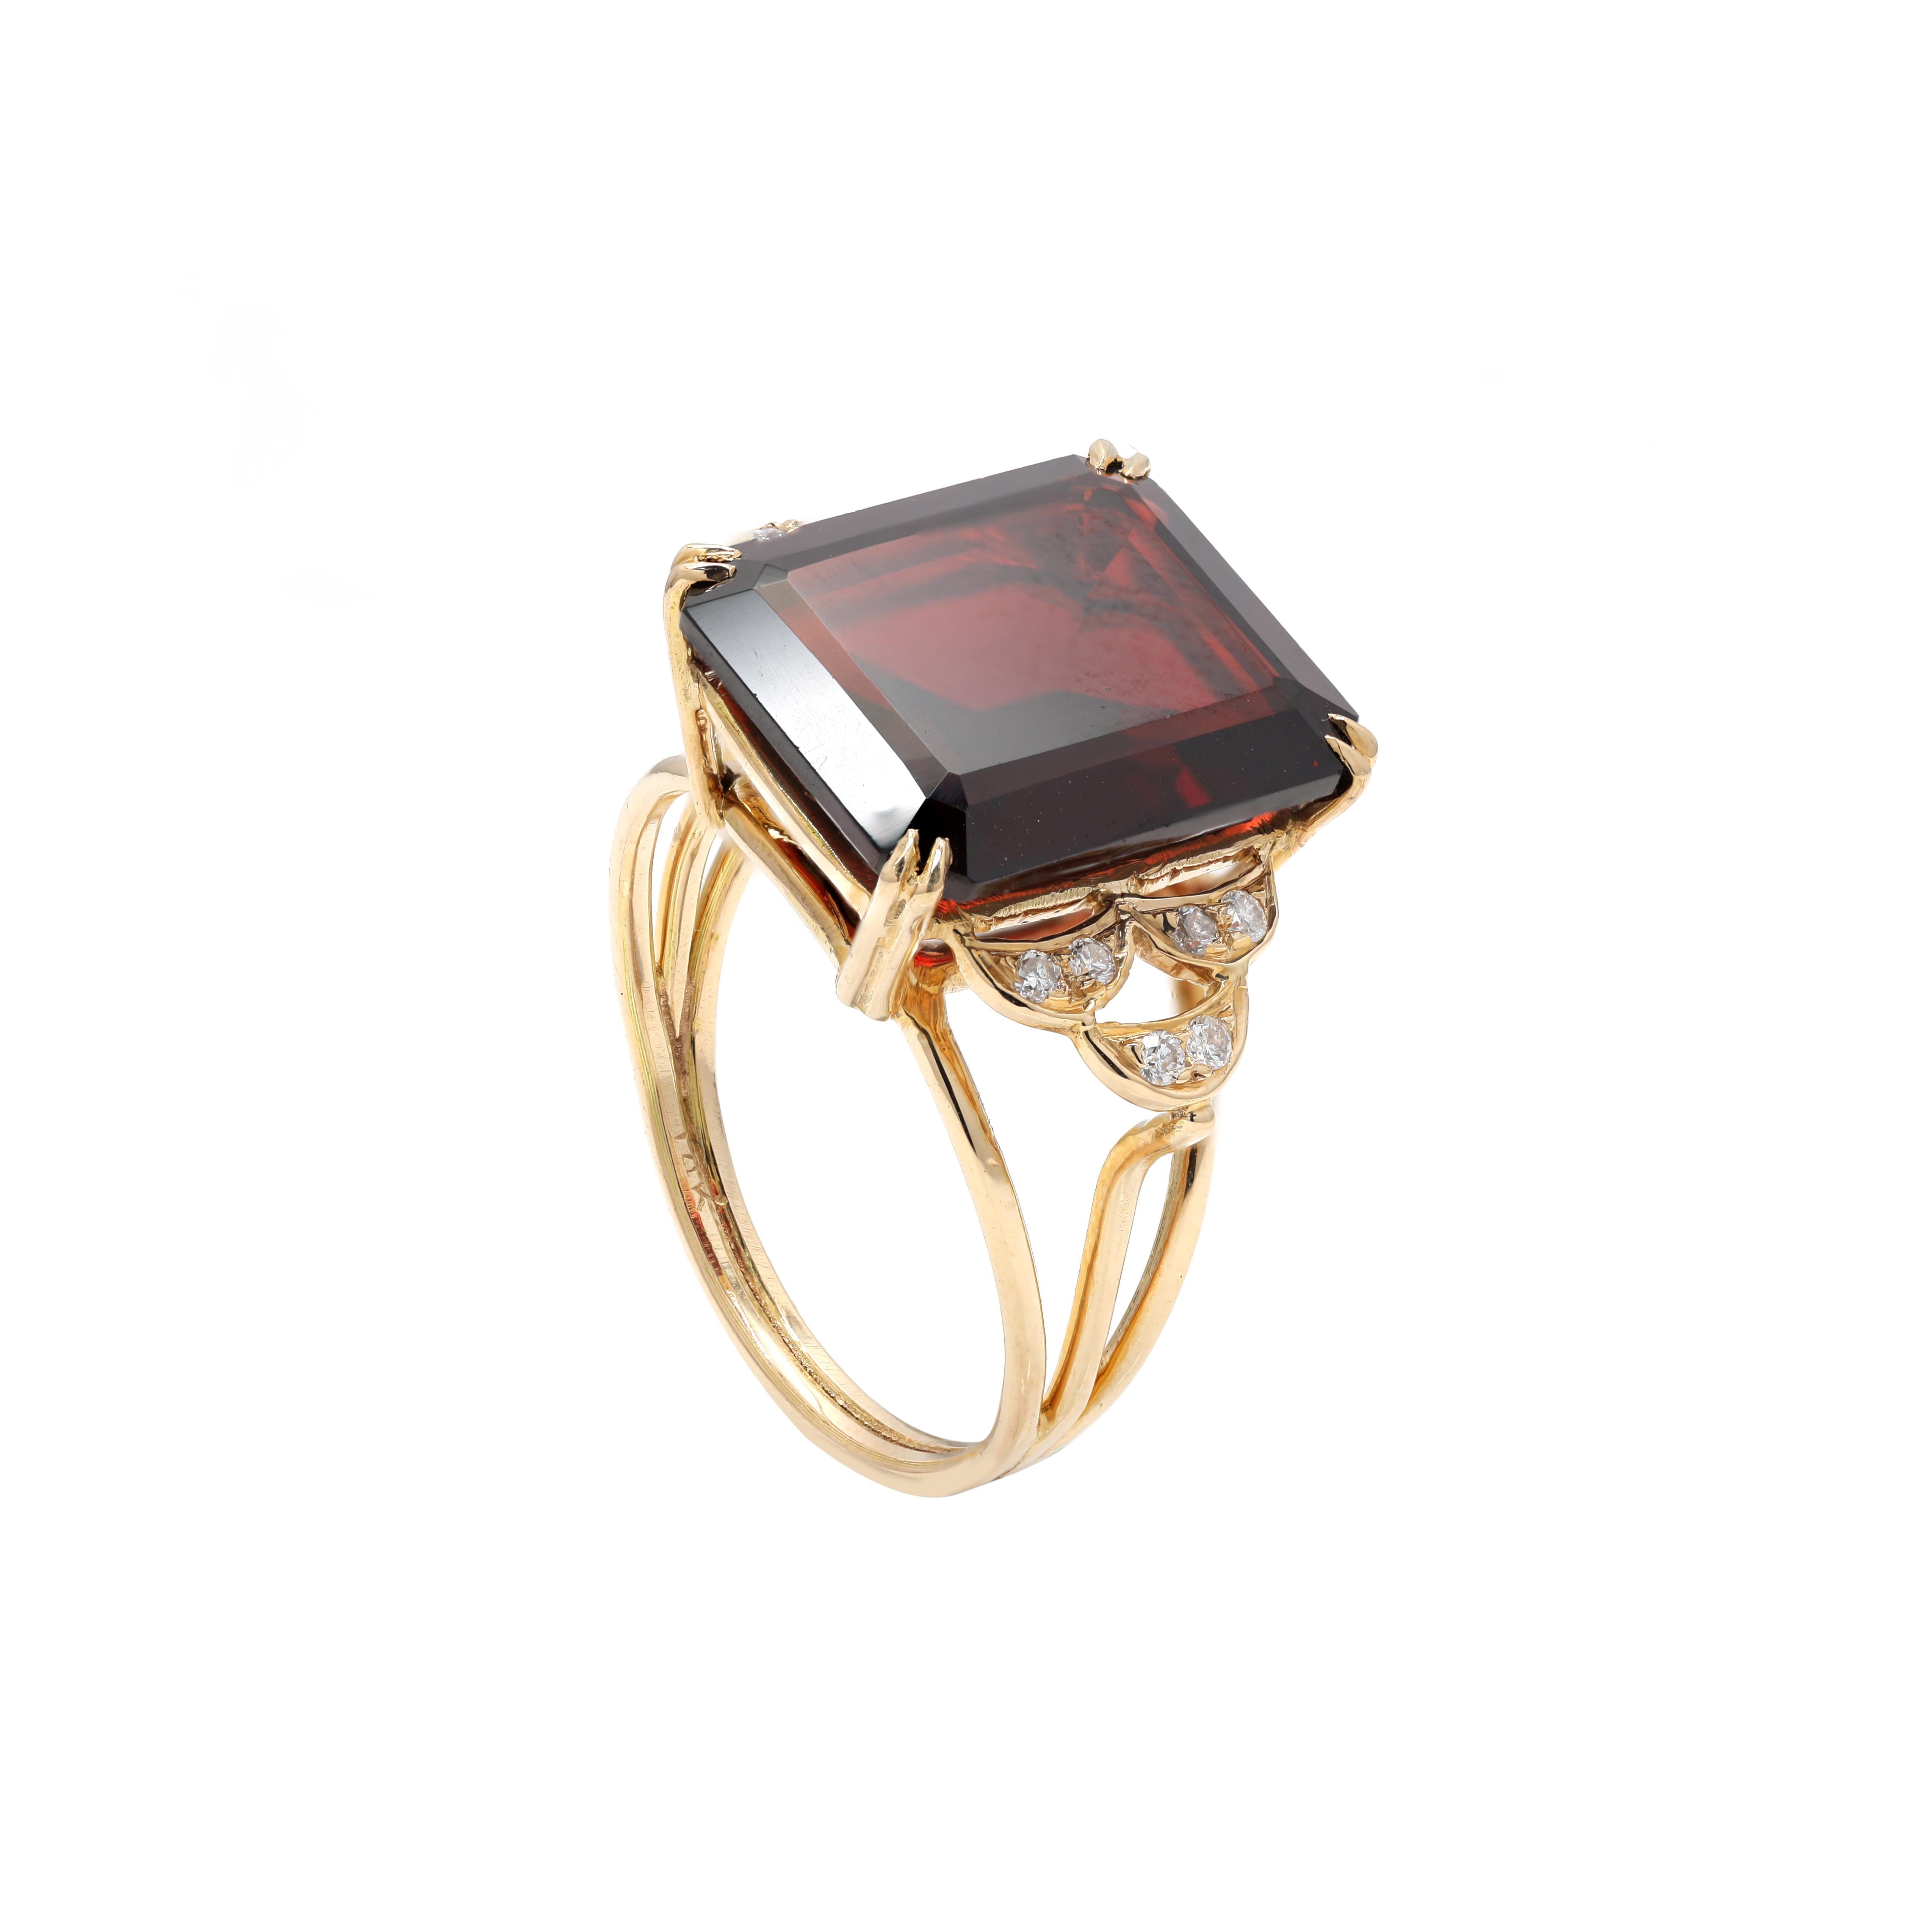 For Sale:  14k Solid Yellow Gold 10.7 Carat Deep Red Garnet Gemstone Ring with Diamonds 4